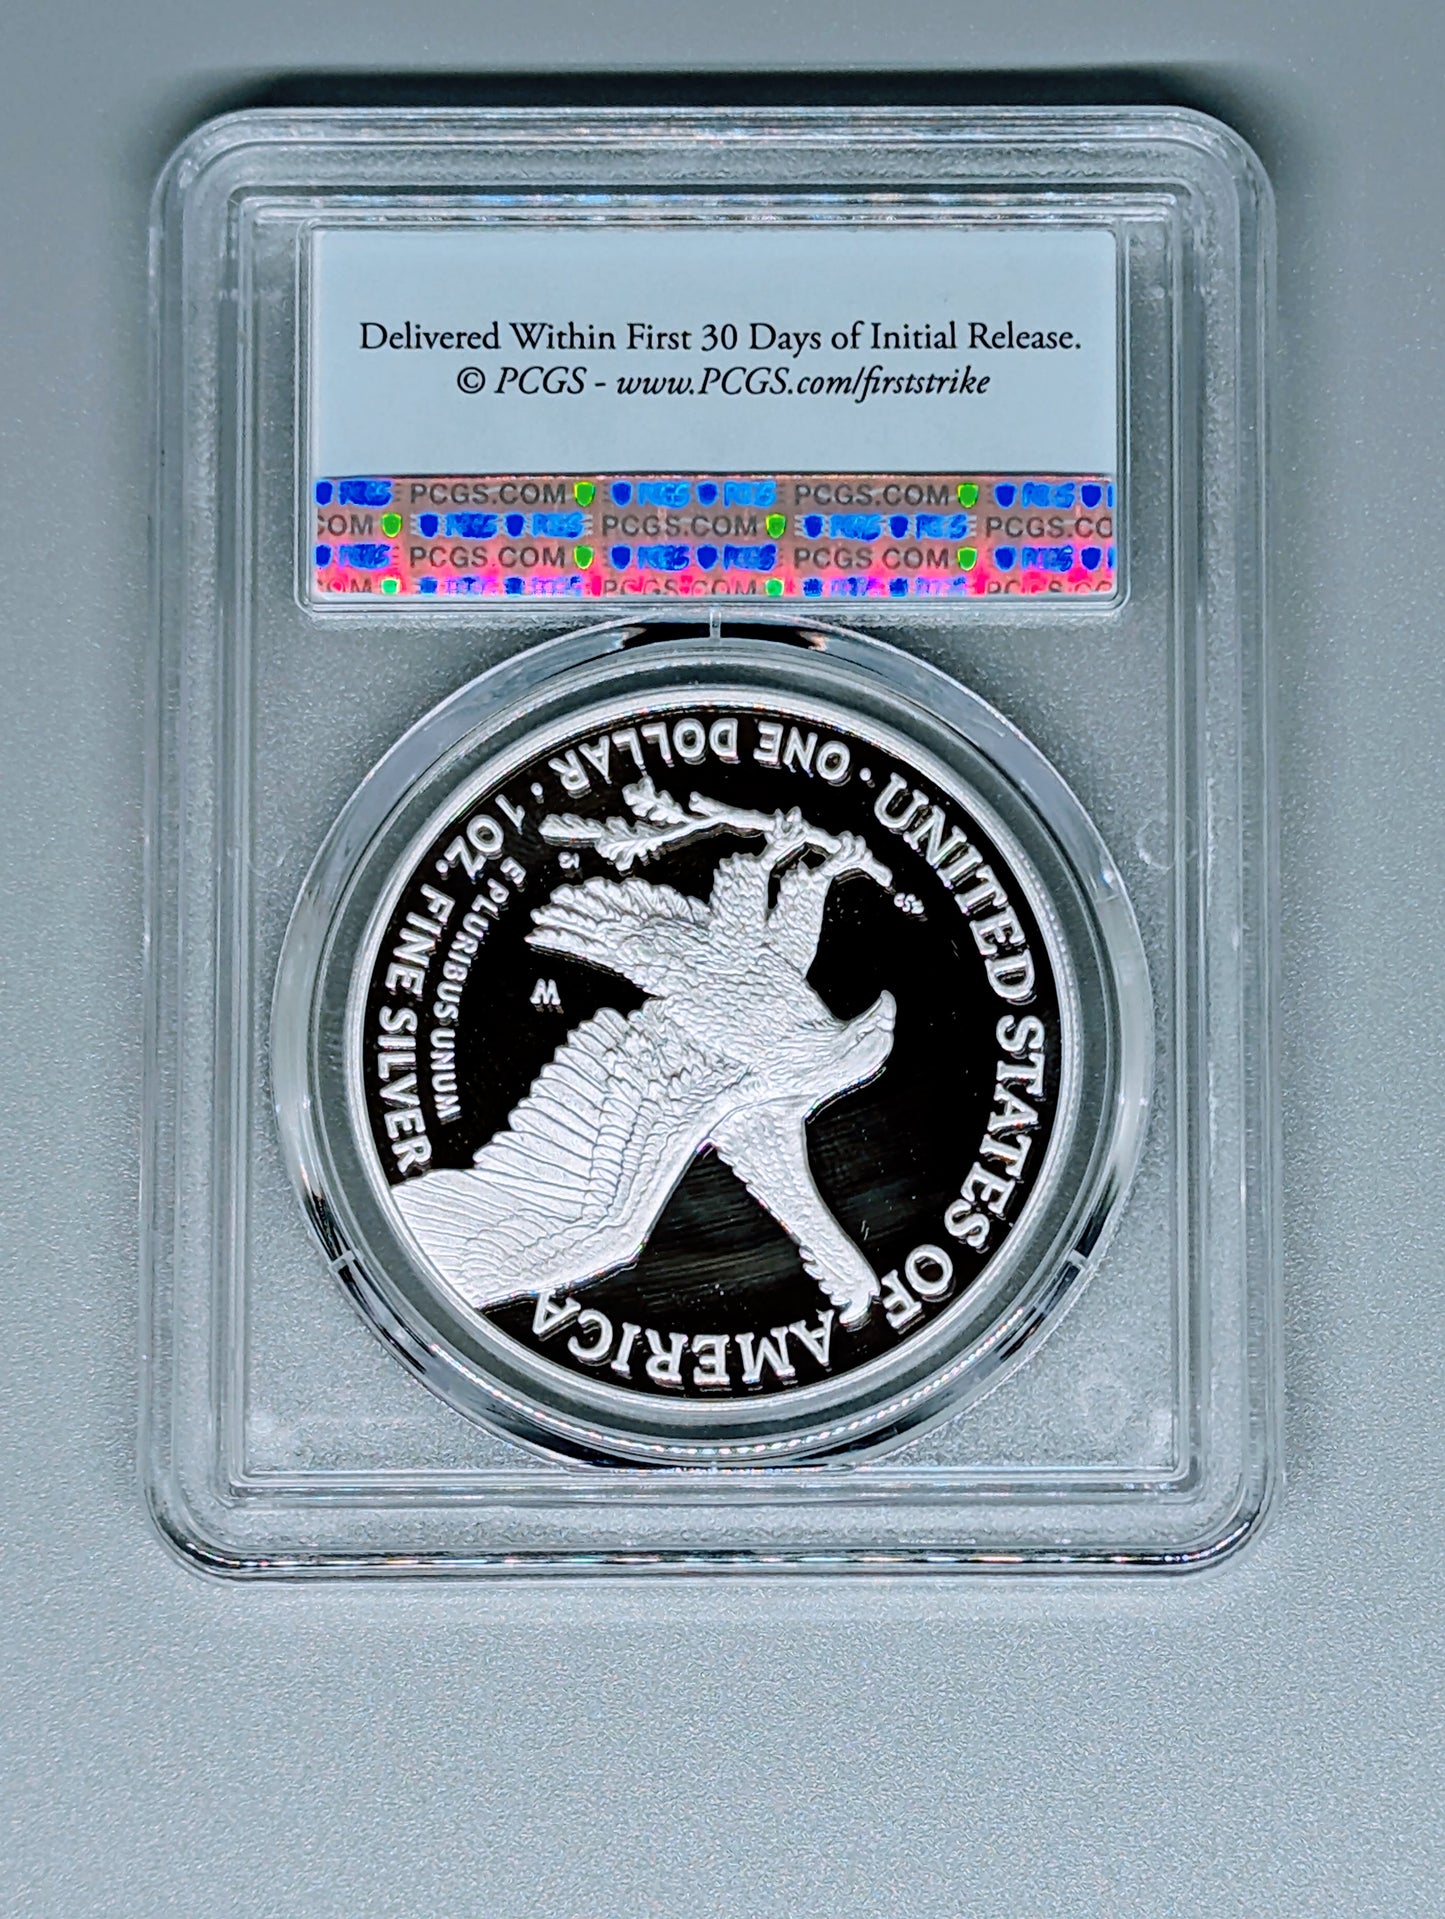 2023-W $1 American Eagle 1 oz. Silver Proof Coin - PCGS PR69DCAM - First Strike